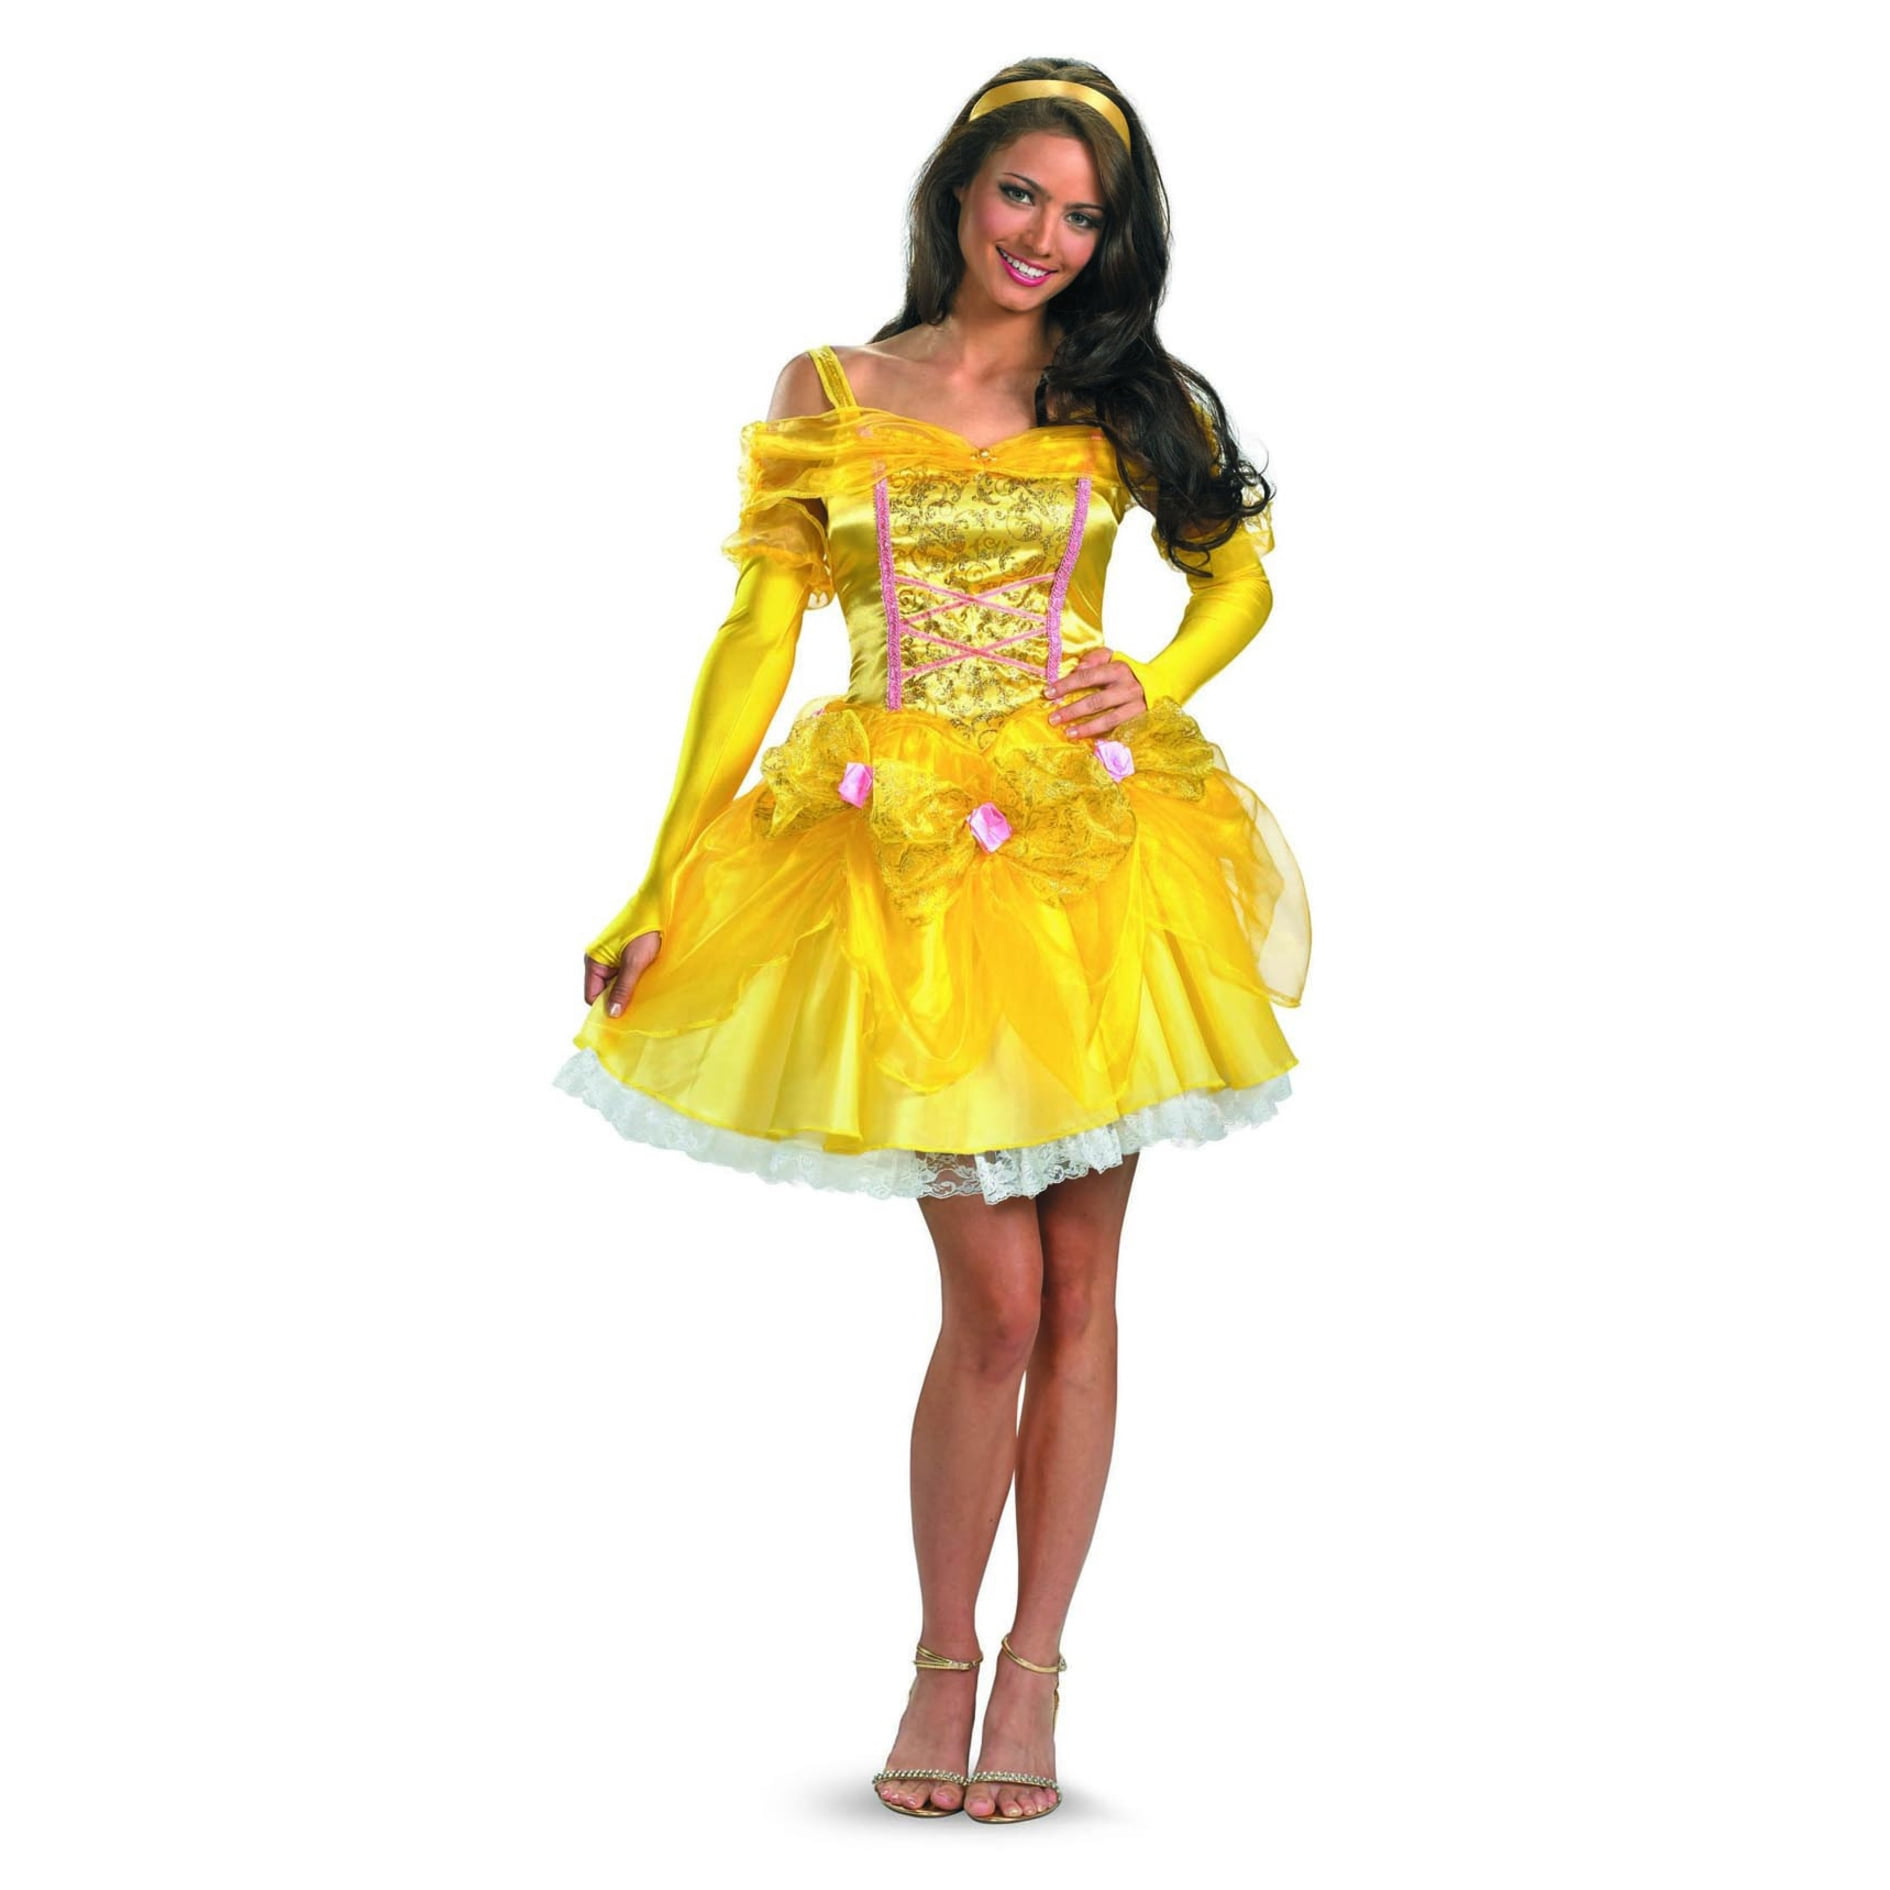 Buy Kaku Fancy Dresses Lemon Vegetable Costume -Yellow, 3-4 Years, For Boys  & Girls Online at Low Prices in India - Amazon.in